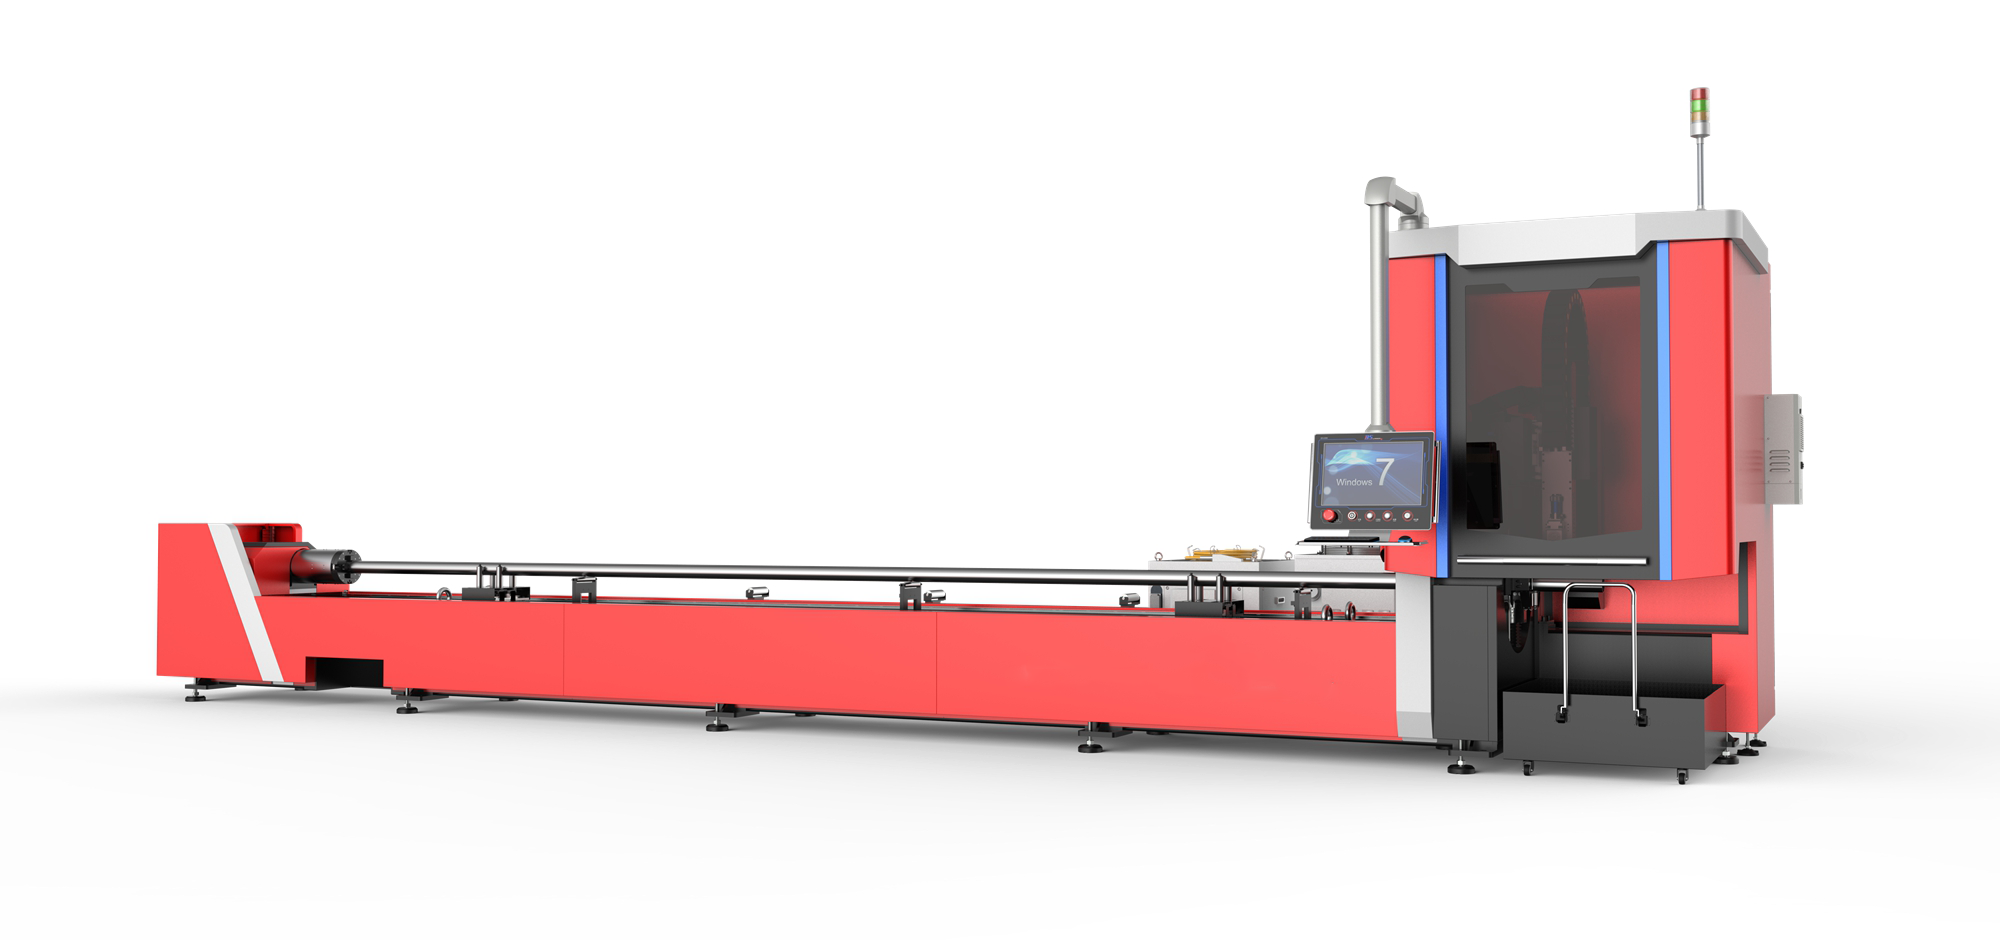 Bottom price China Monthly Deals CNC Fiber Laser Cutting Machine /CO2 Laser Cutting or Engraving Machine Laser Tools for Sheet or Pipe Metal Carbon Steel Galvanized Steel Alu Featured Image